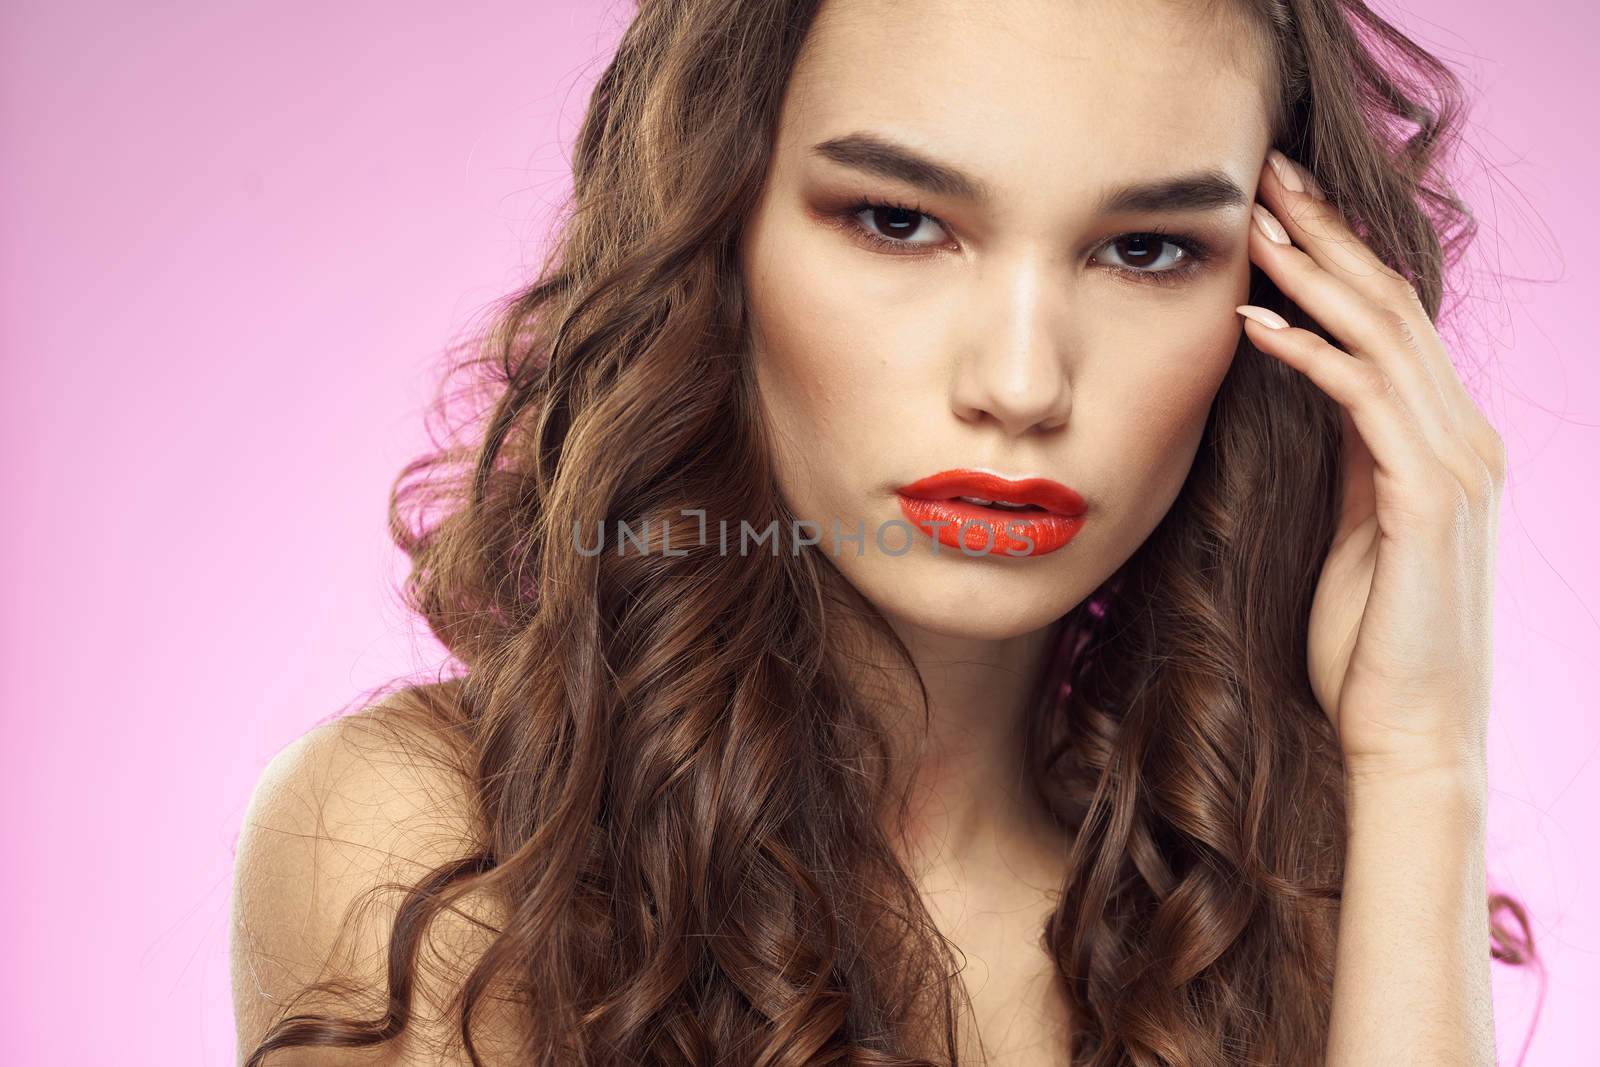 woman bright makeup red lips naked shoulders purple background. High quality photo